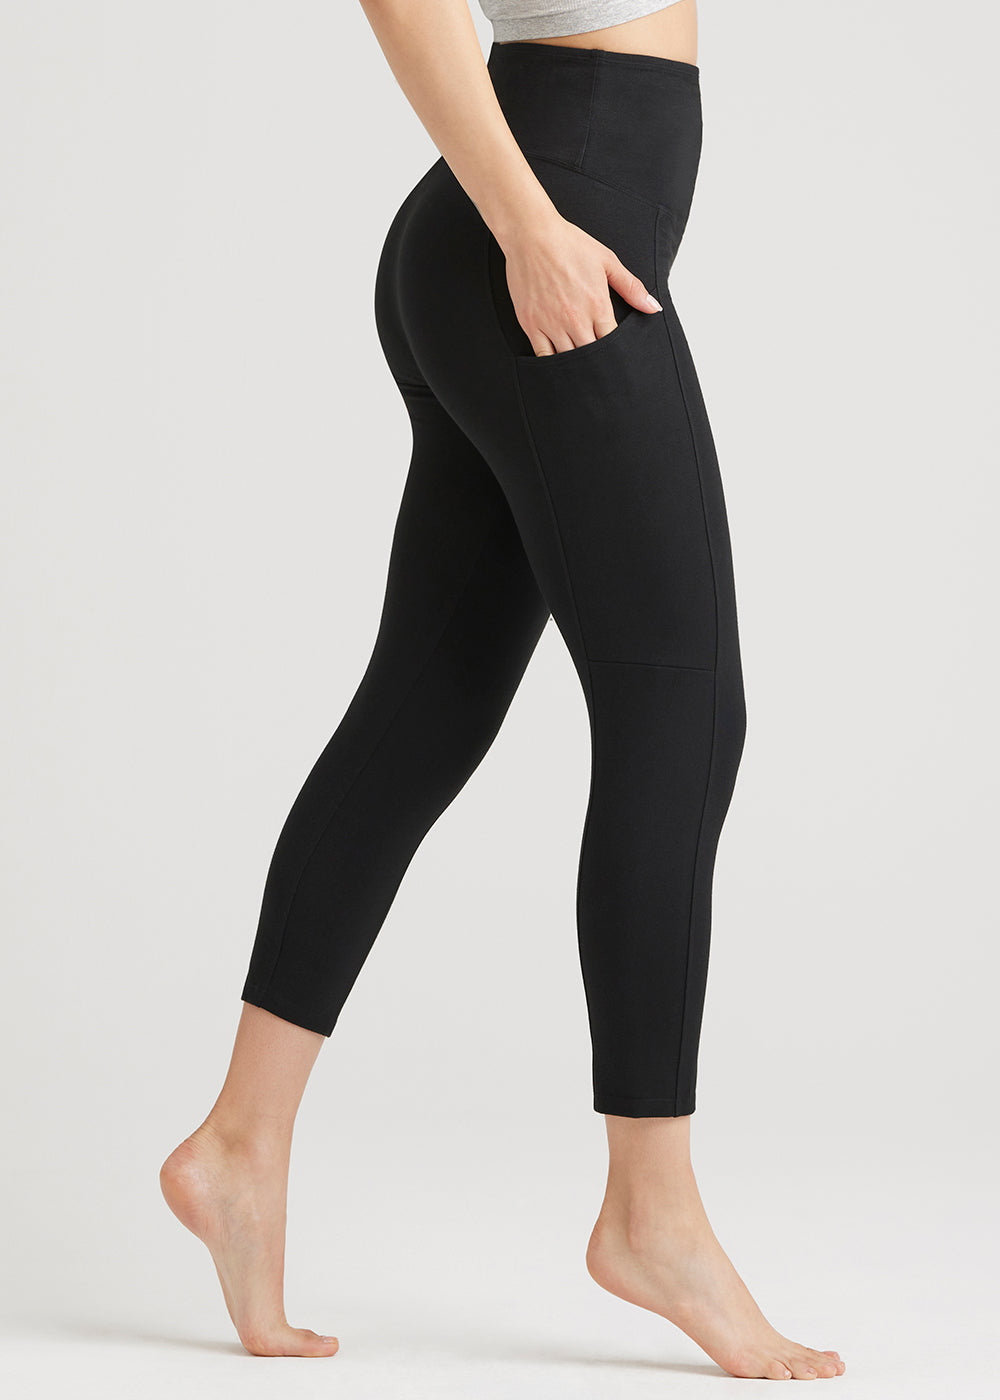 Gloria 7/8 Ankle Shaping Legging with Pockets - Cotton Stretch from Yummie in Black  - 1